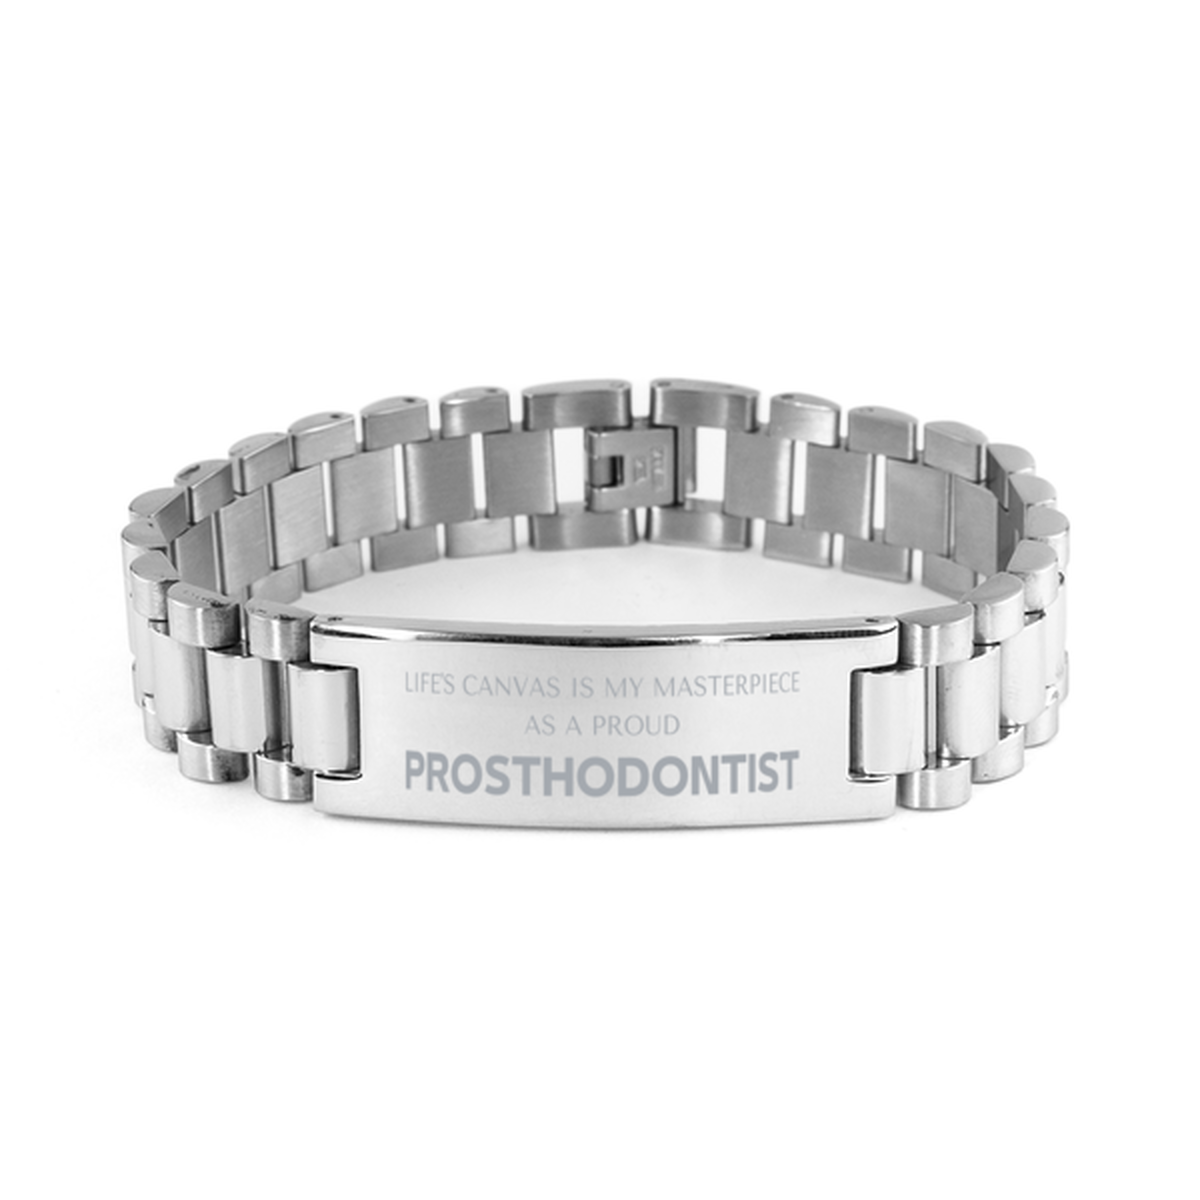 Proud Prosthodontist Gifts, Life's canvas is my masterpiece, Epic Birthday Christmas Unique Ladder Stainless Steel Bracelet For Prosthodontist, Coworkers, Men, Women, Friends